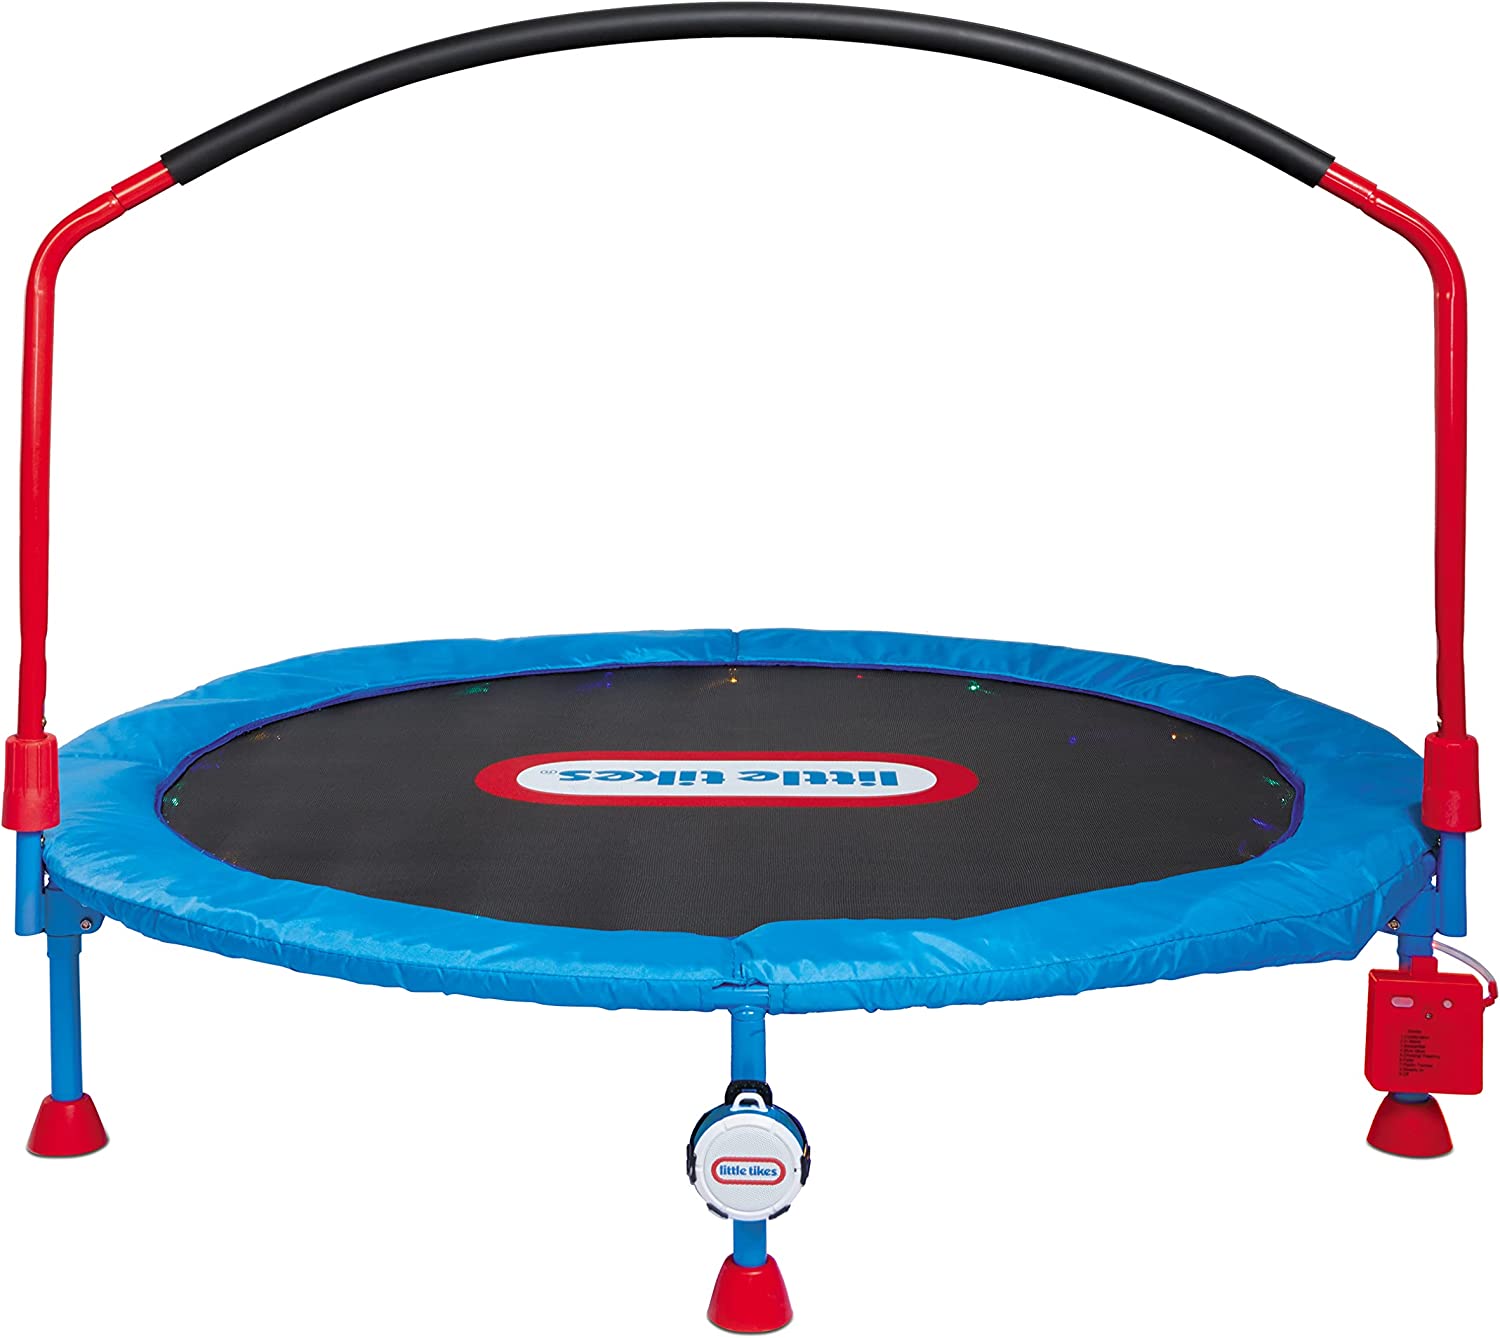 Giantex Mini Trampoline, 2 Persons Foldable Fitness Trampoline w/ 5 Levels  Height Adjustable Handle, Max Load 330LBS, Indoor Oval Rebounder Exercise